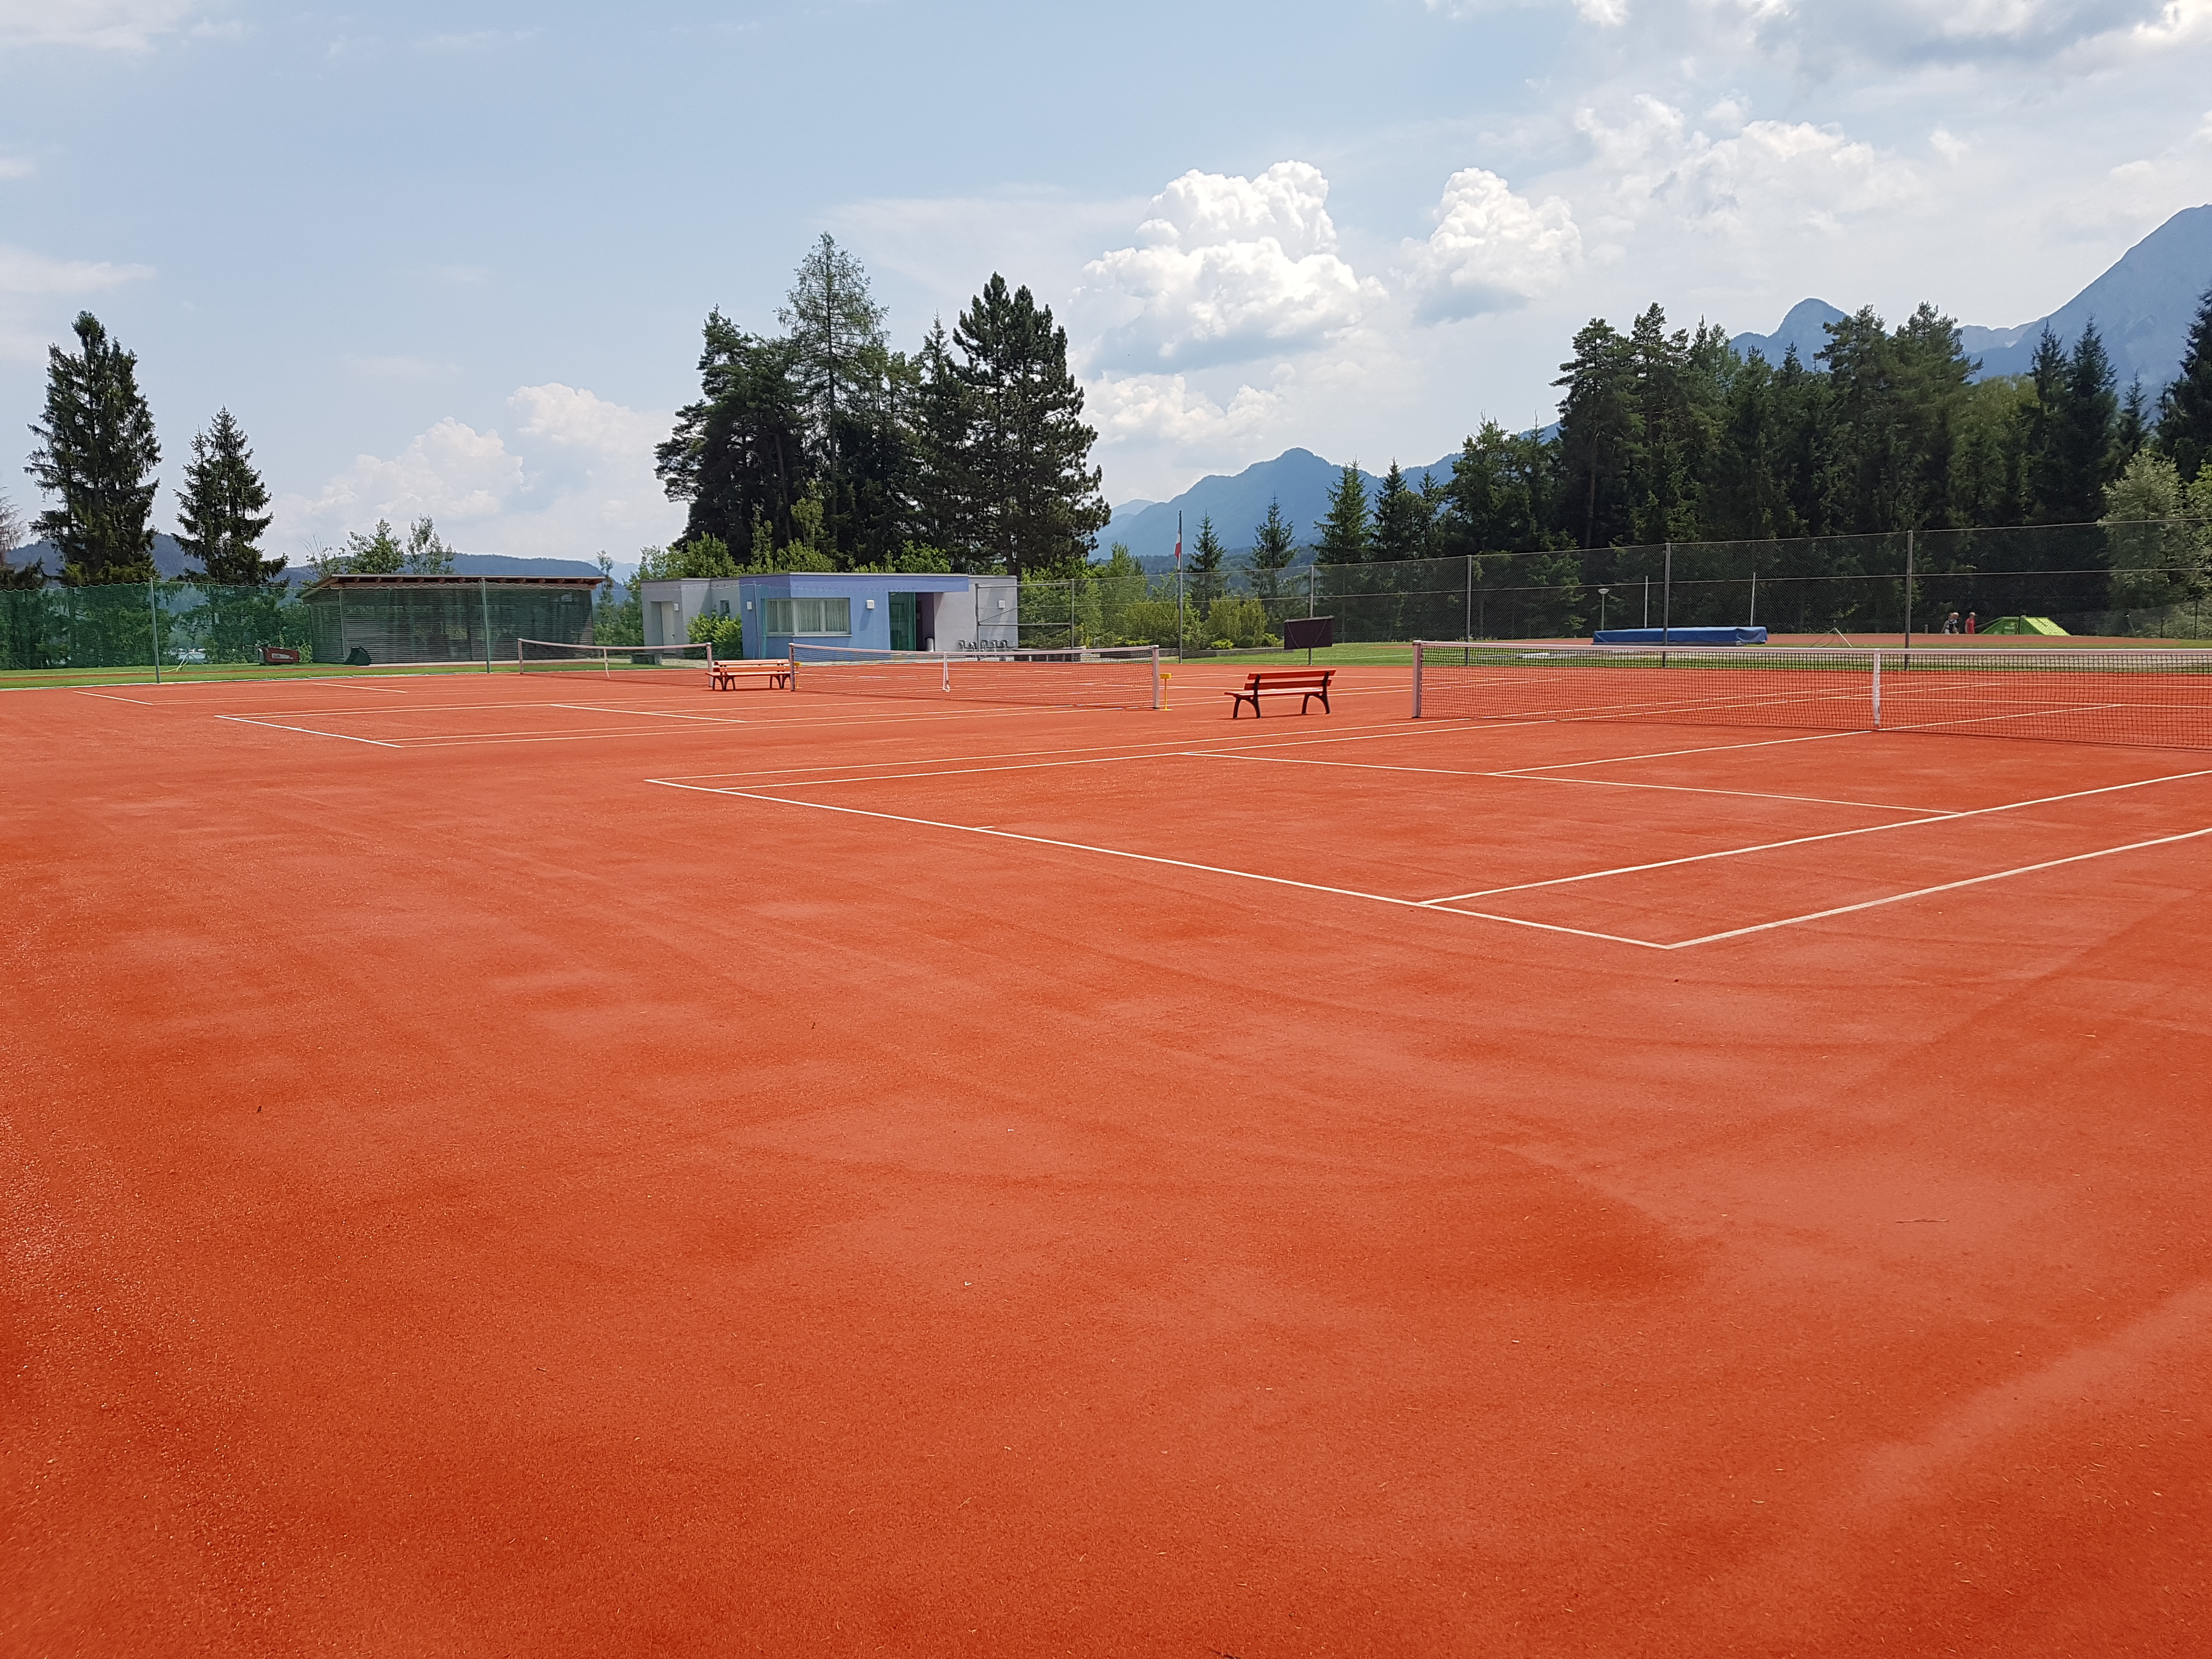 Tennis - Specialty competency